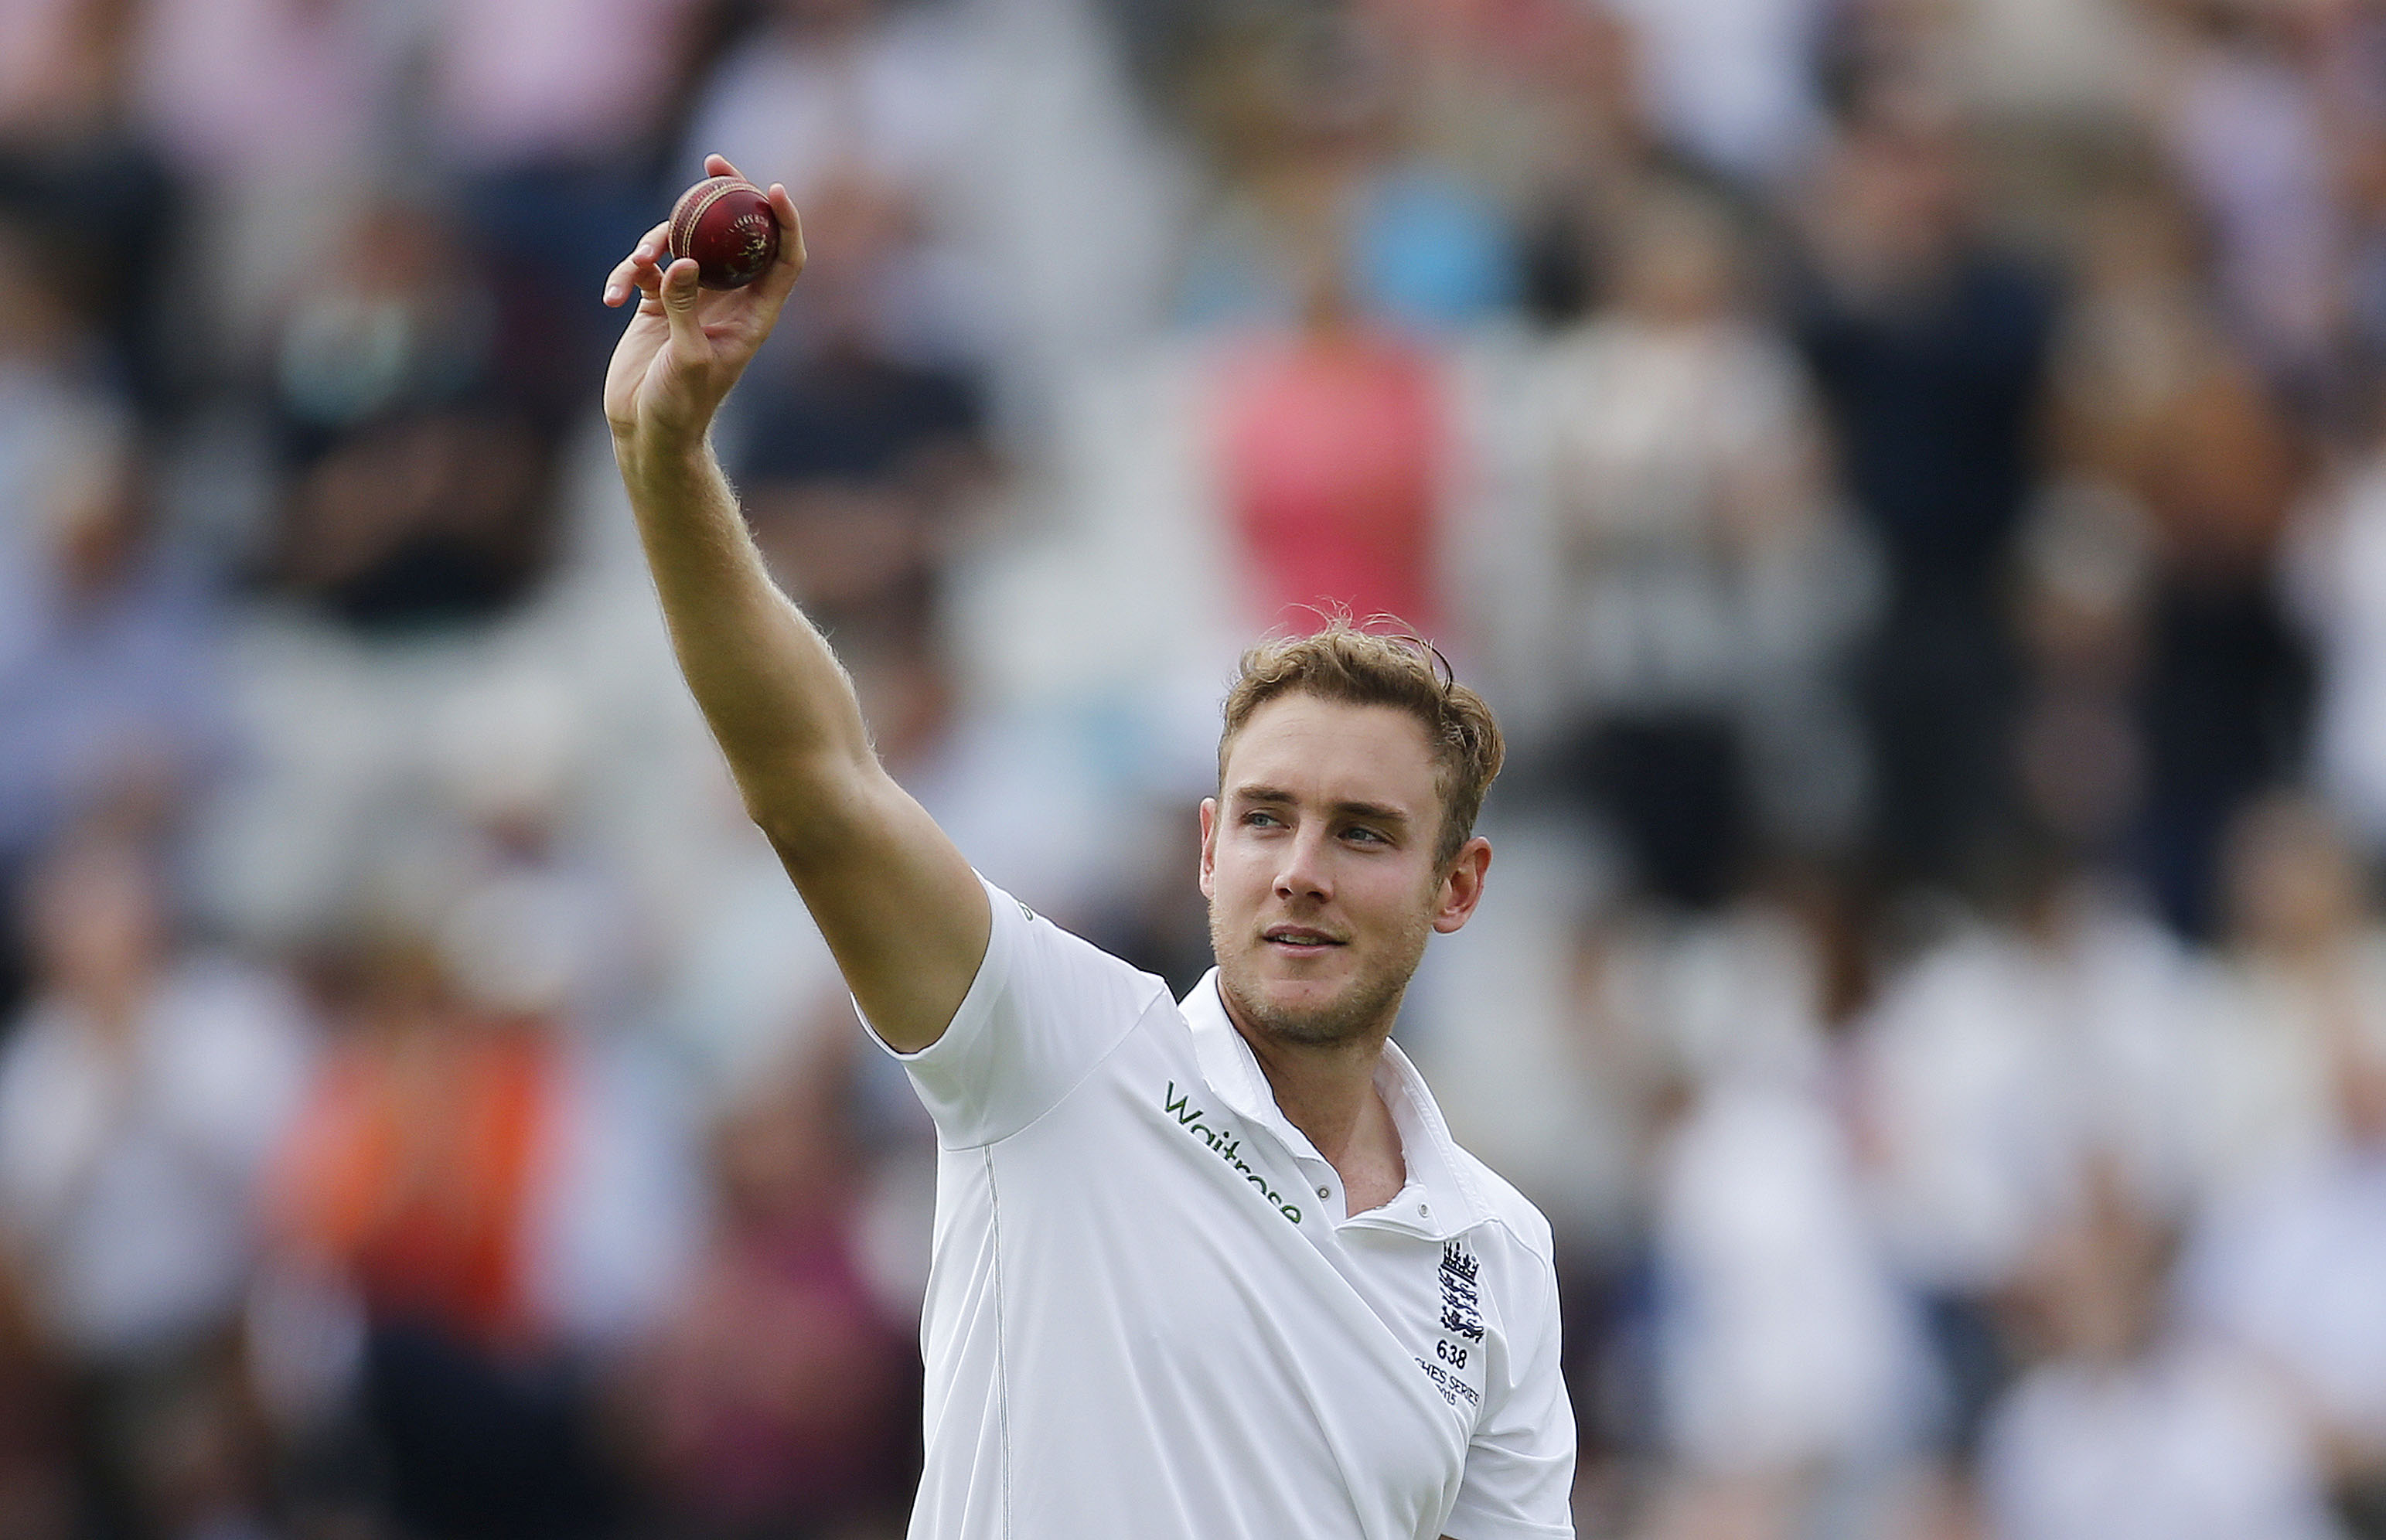 It's a game of cricket, not war: Broad on Ashes